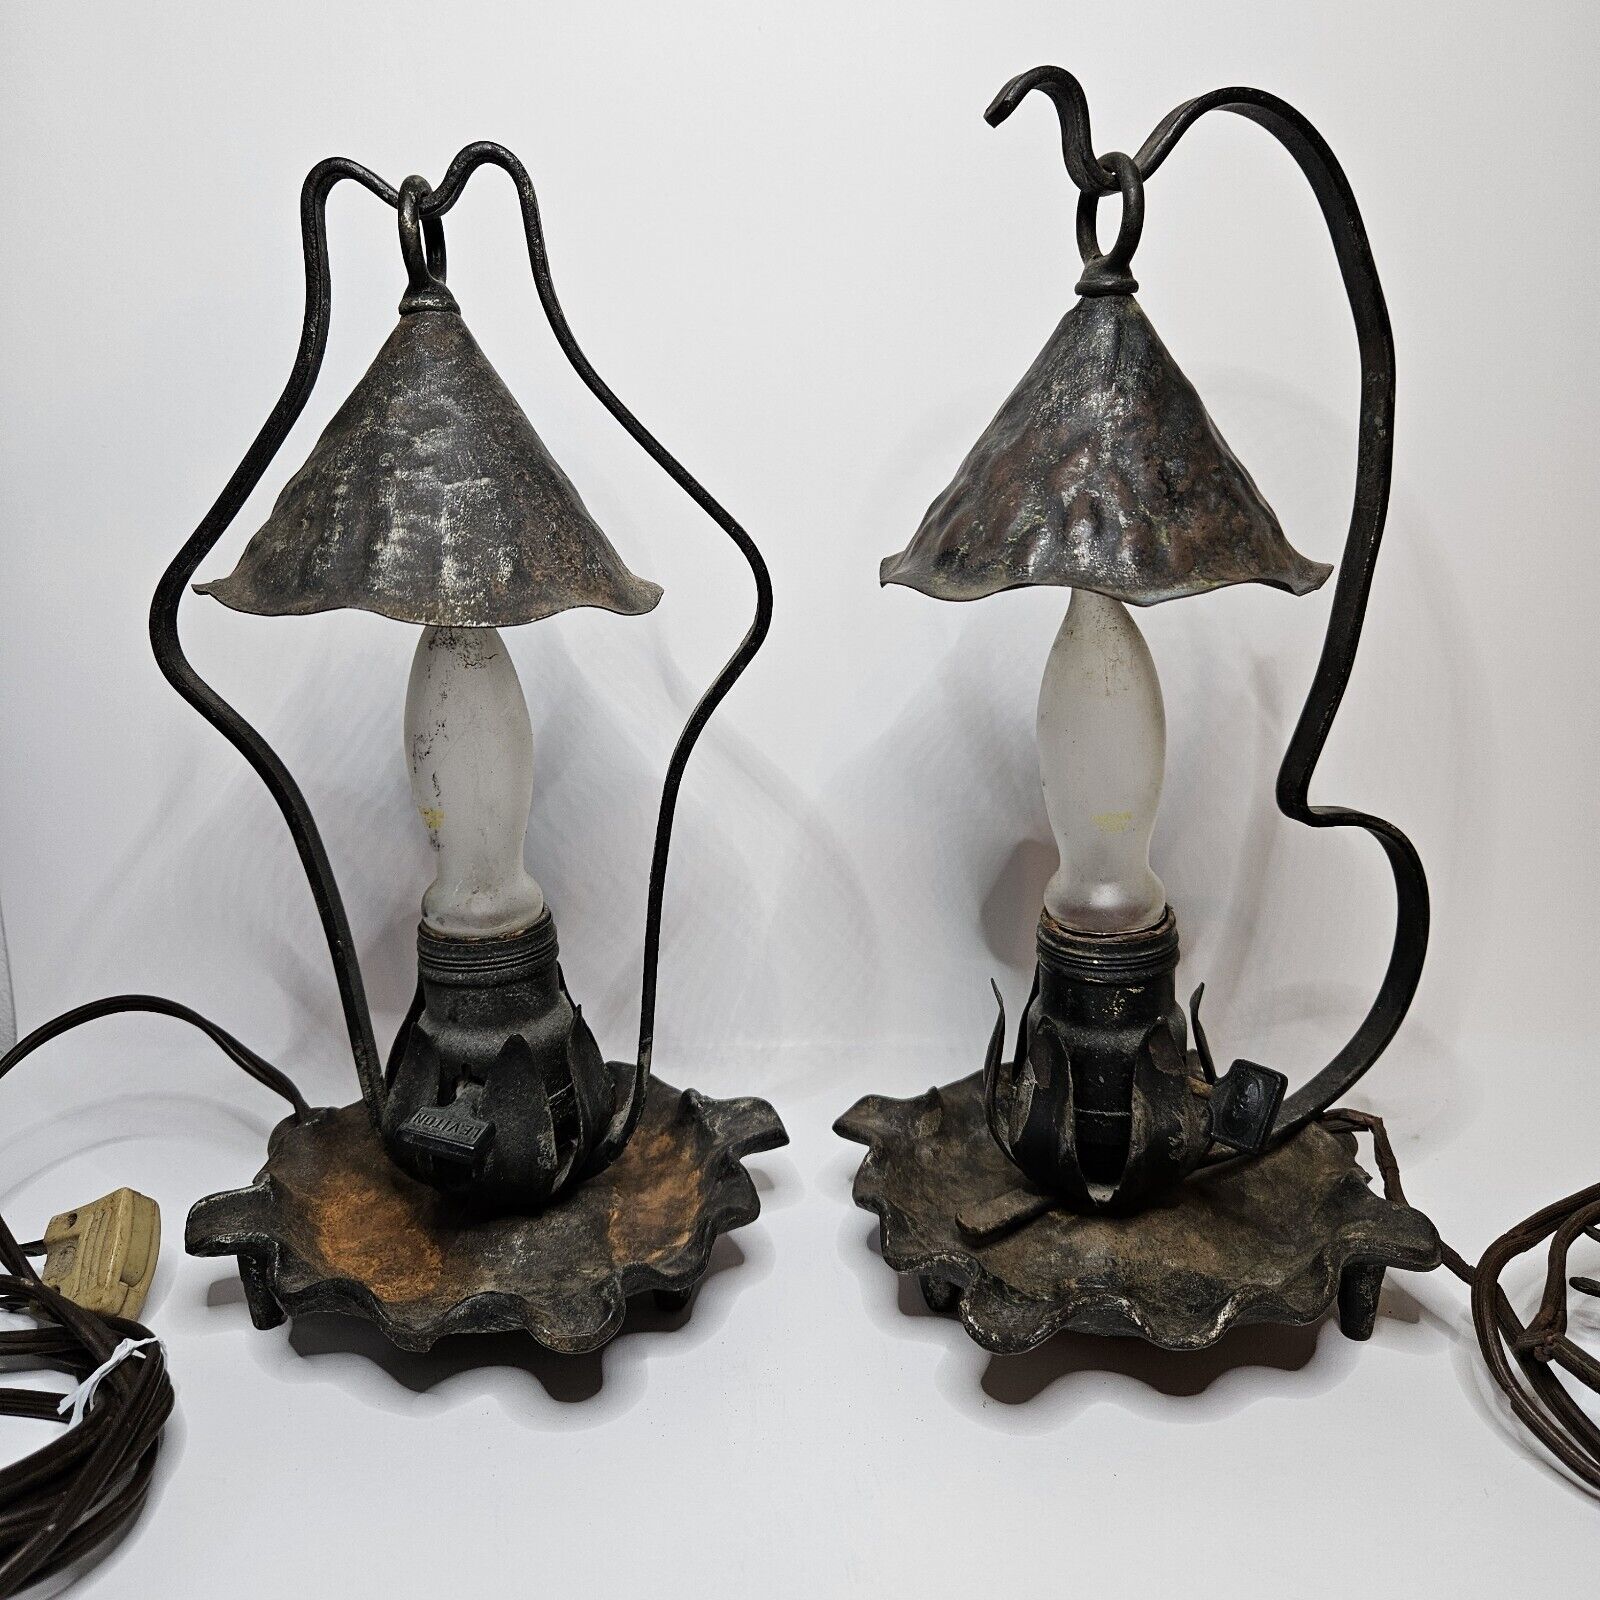 Vintage Leviton wrought iron lamp With Stands - Early 1900's Lamp Set Of 2